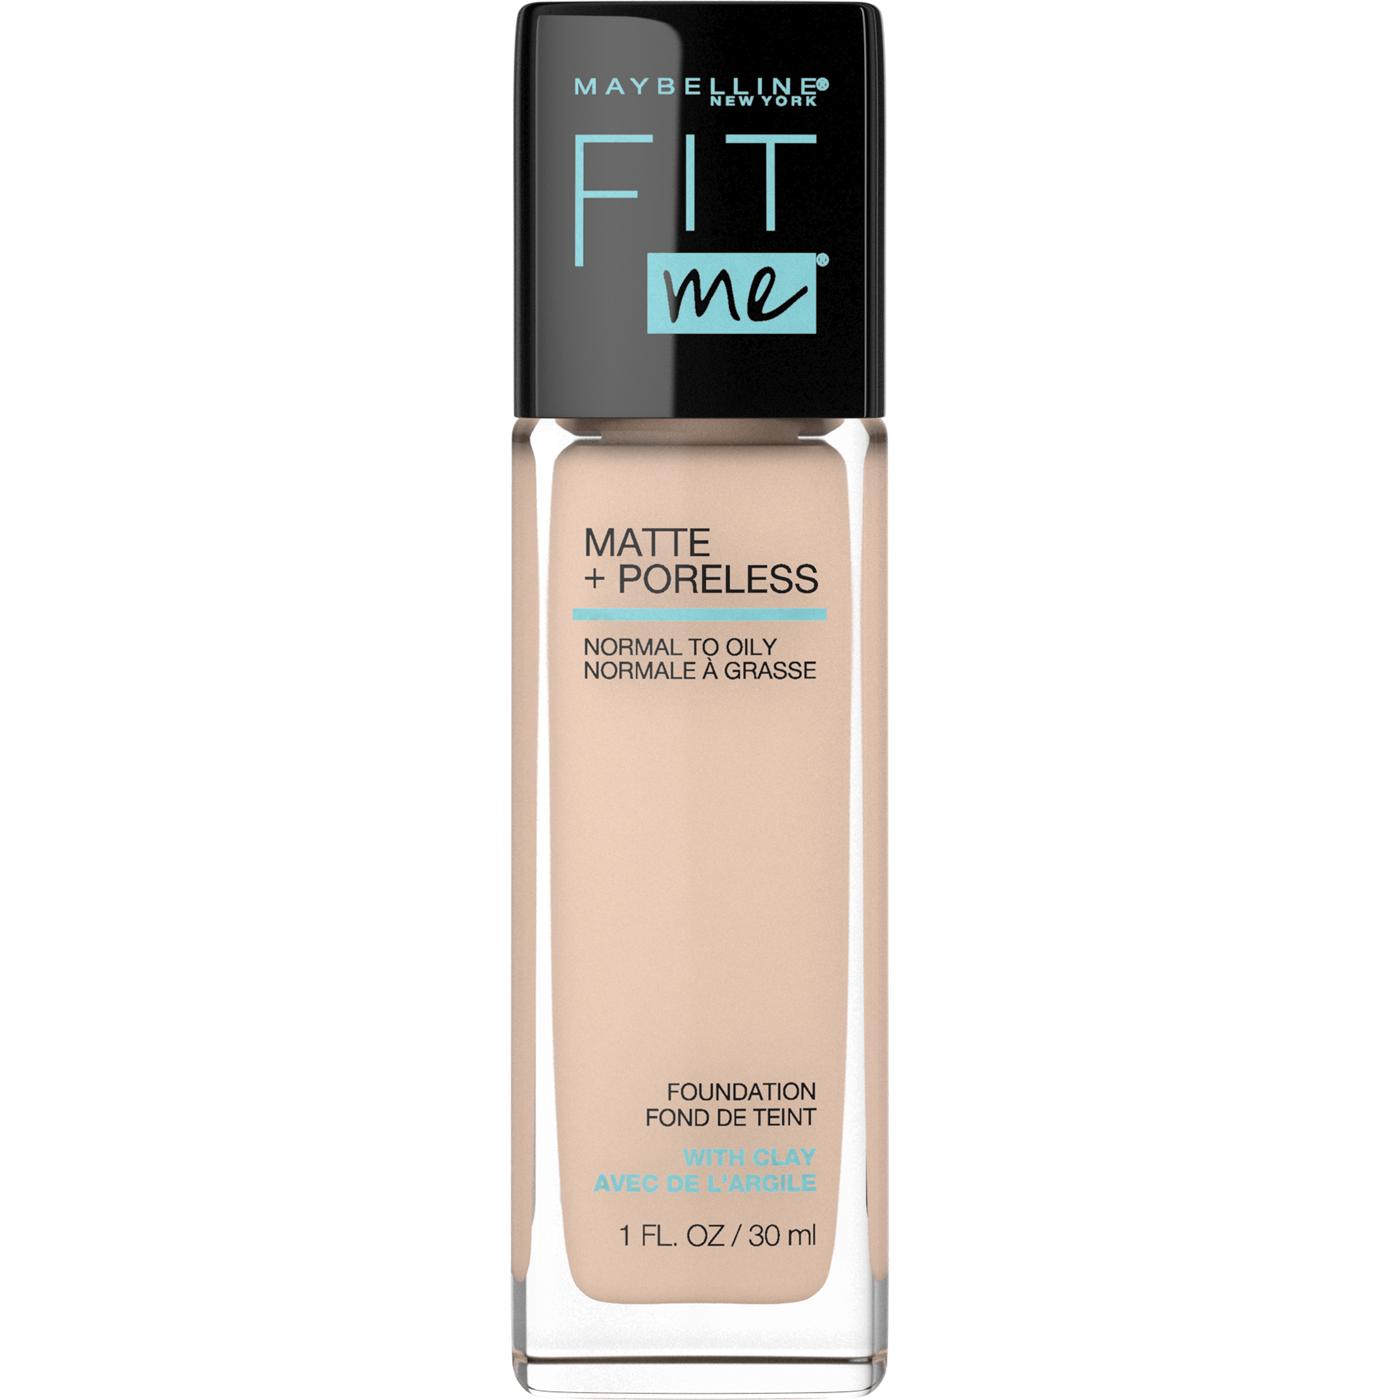 Maybelline Fit Me Matte + Poreless Liquid Foundation - Classic Ivory; image 1 of 3